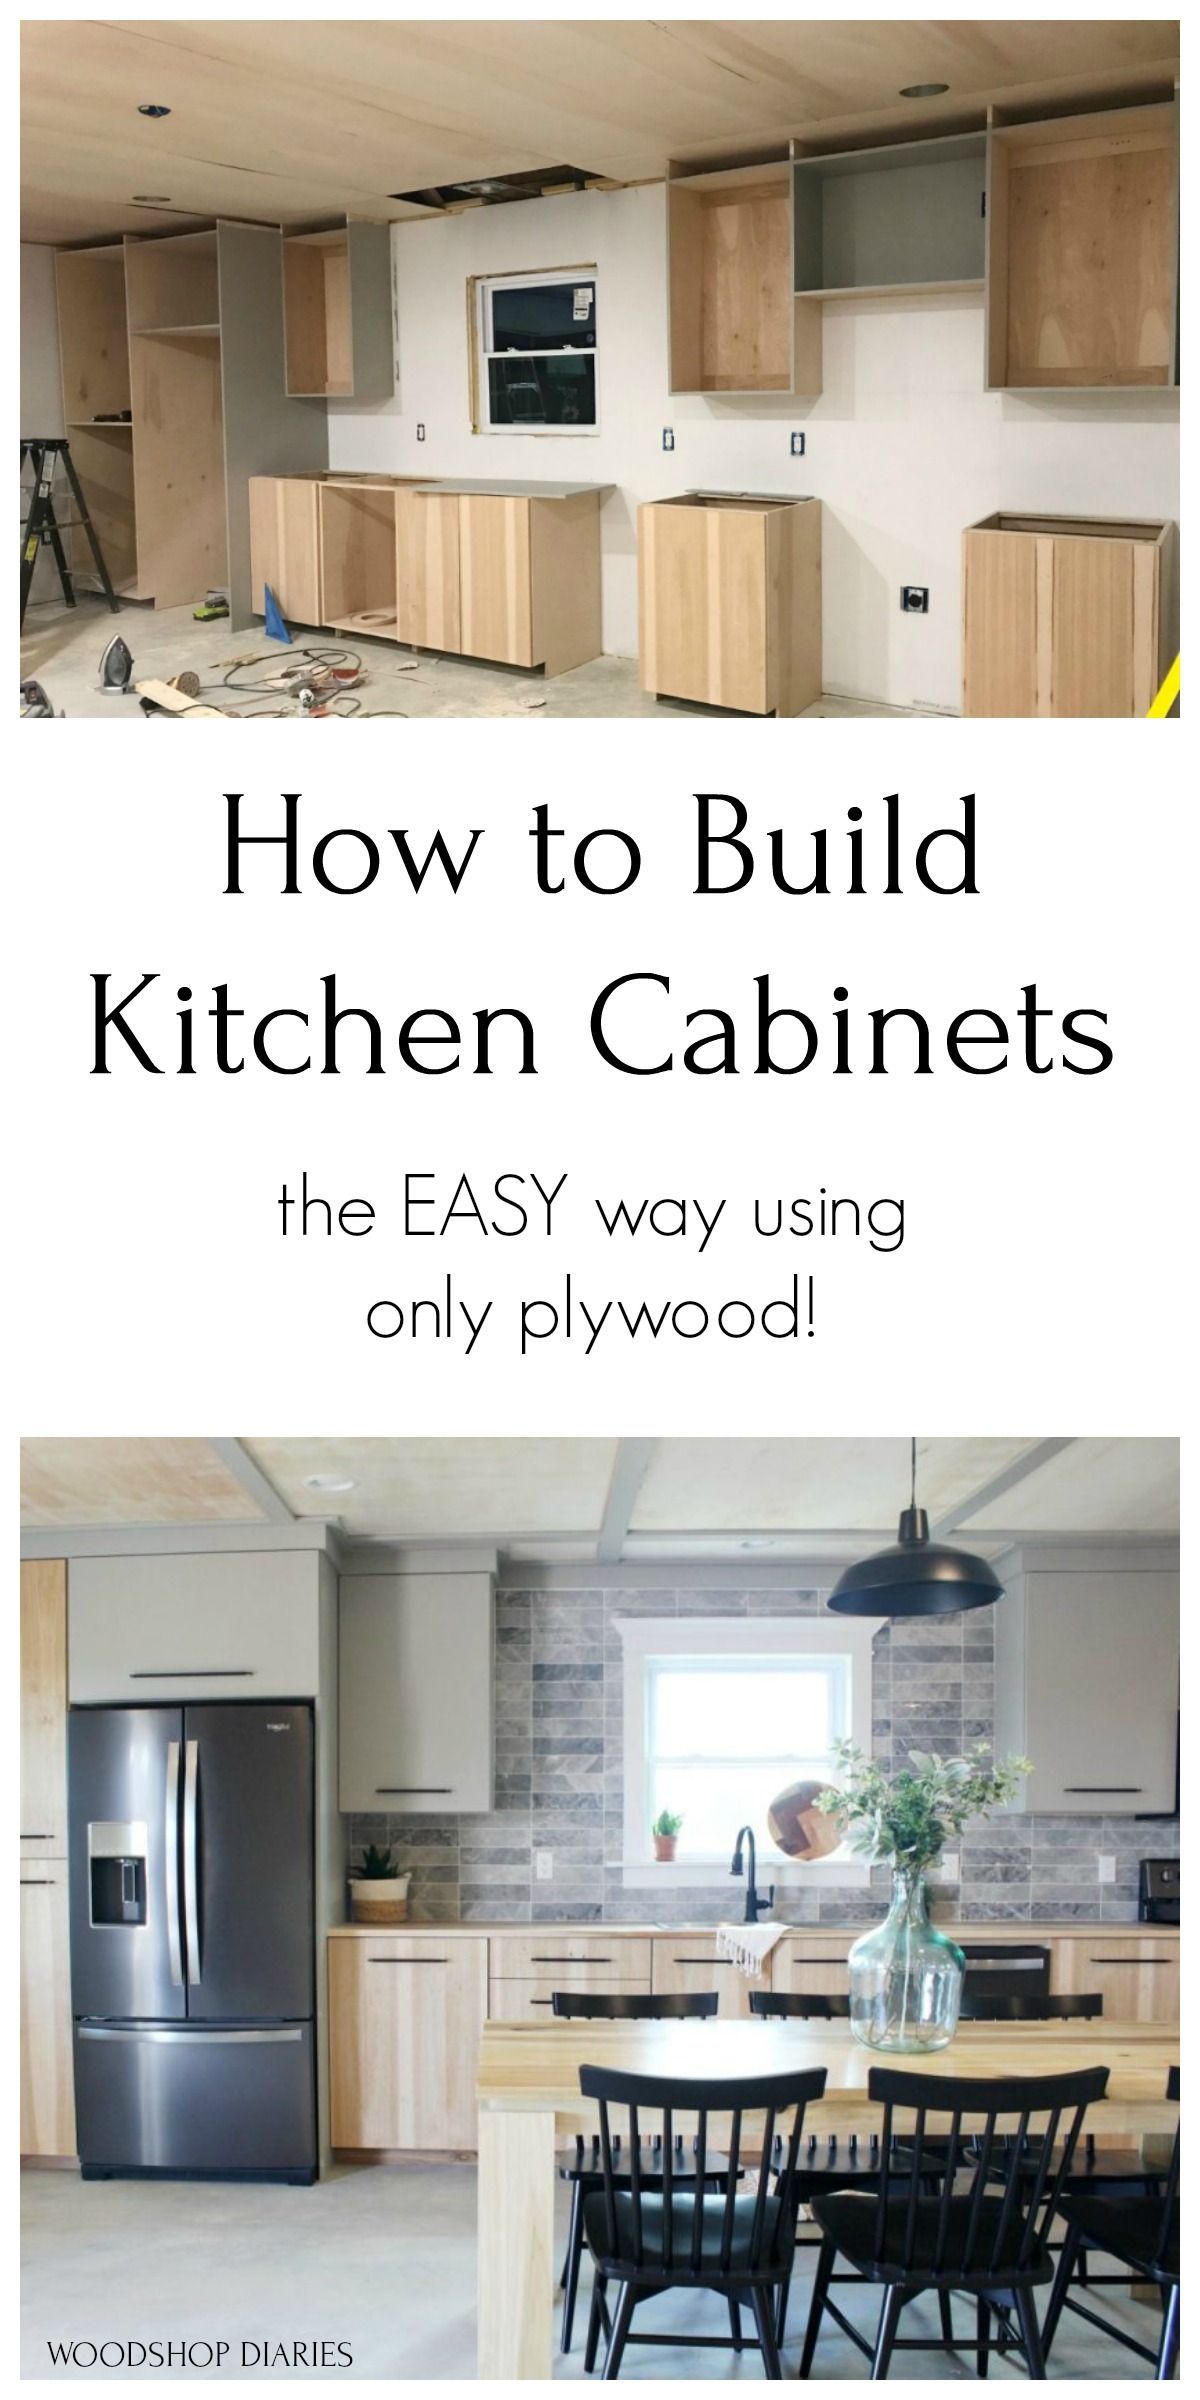 How to Build Your Own Kitchen Cabinets--The EASY Way with Plywood - How to Build Your Own Kitchen Cabinets--The EASY Way with Plywood -   19 diy Kitchen on a budget ideas